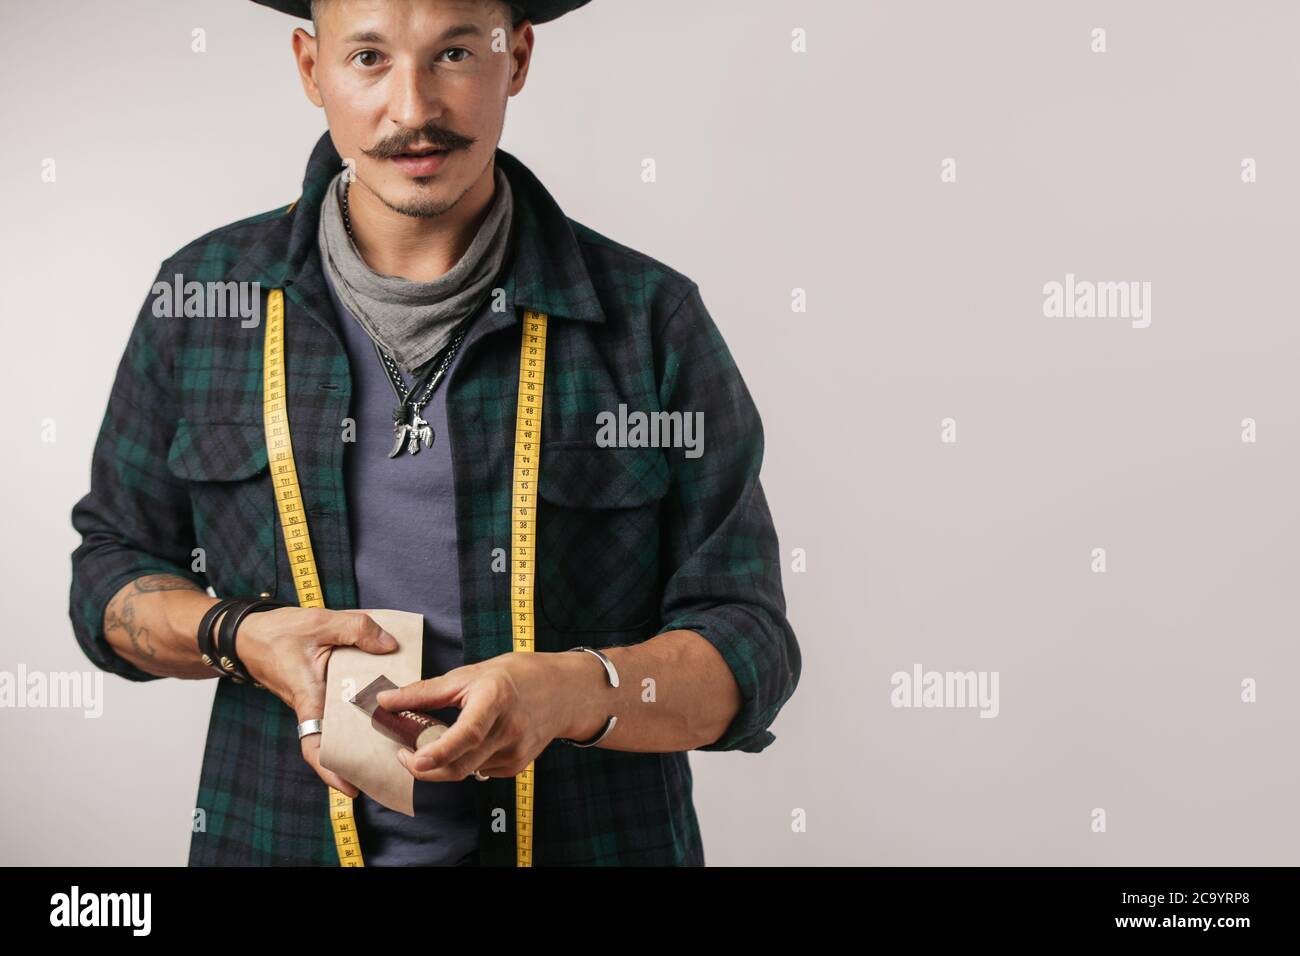 Studio portrait of smiling caucasian mid-aged cobbler wearing trendy hat with measuring tape slapping sole on man s leather boot. Stock Photo